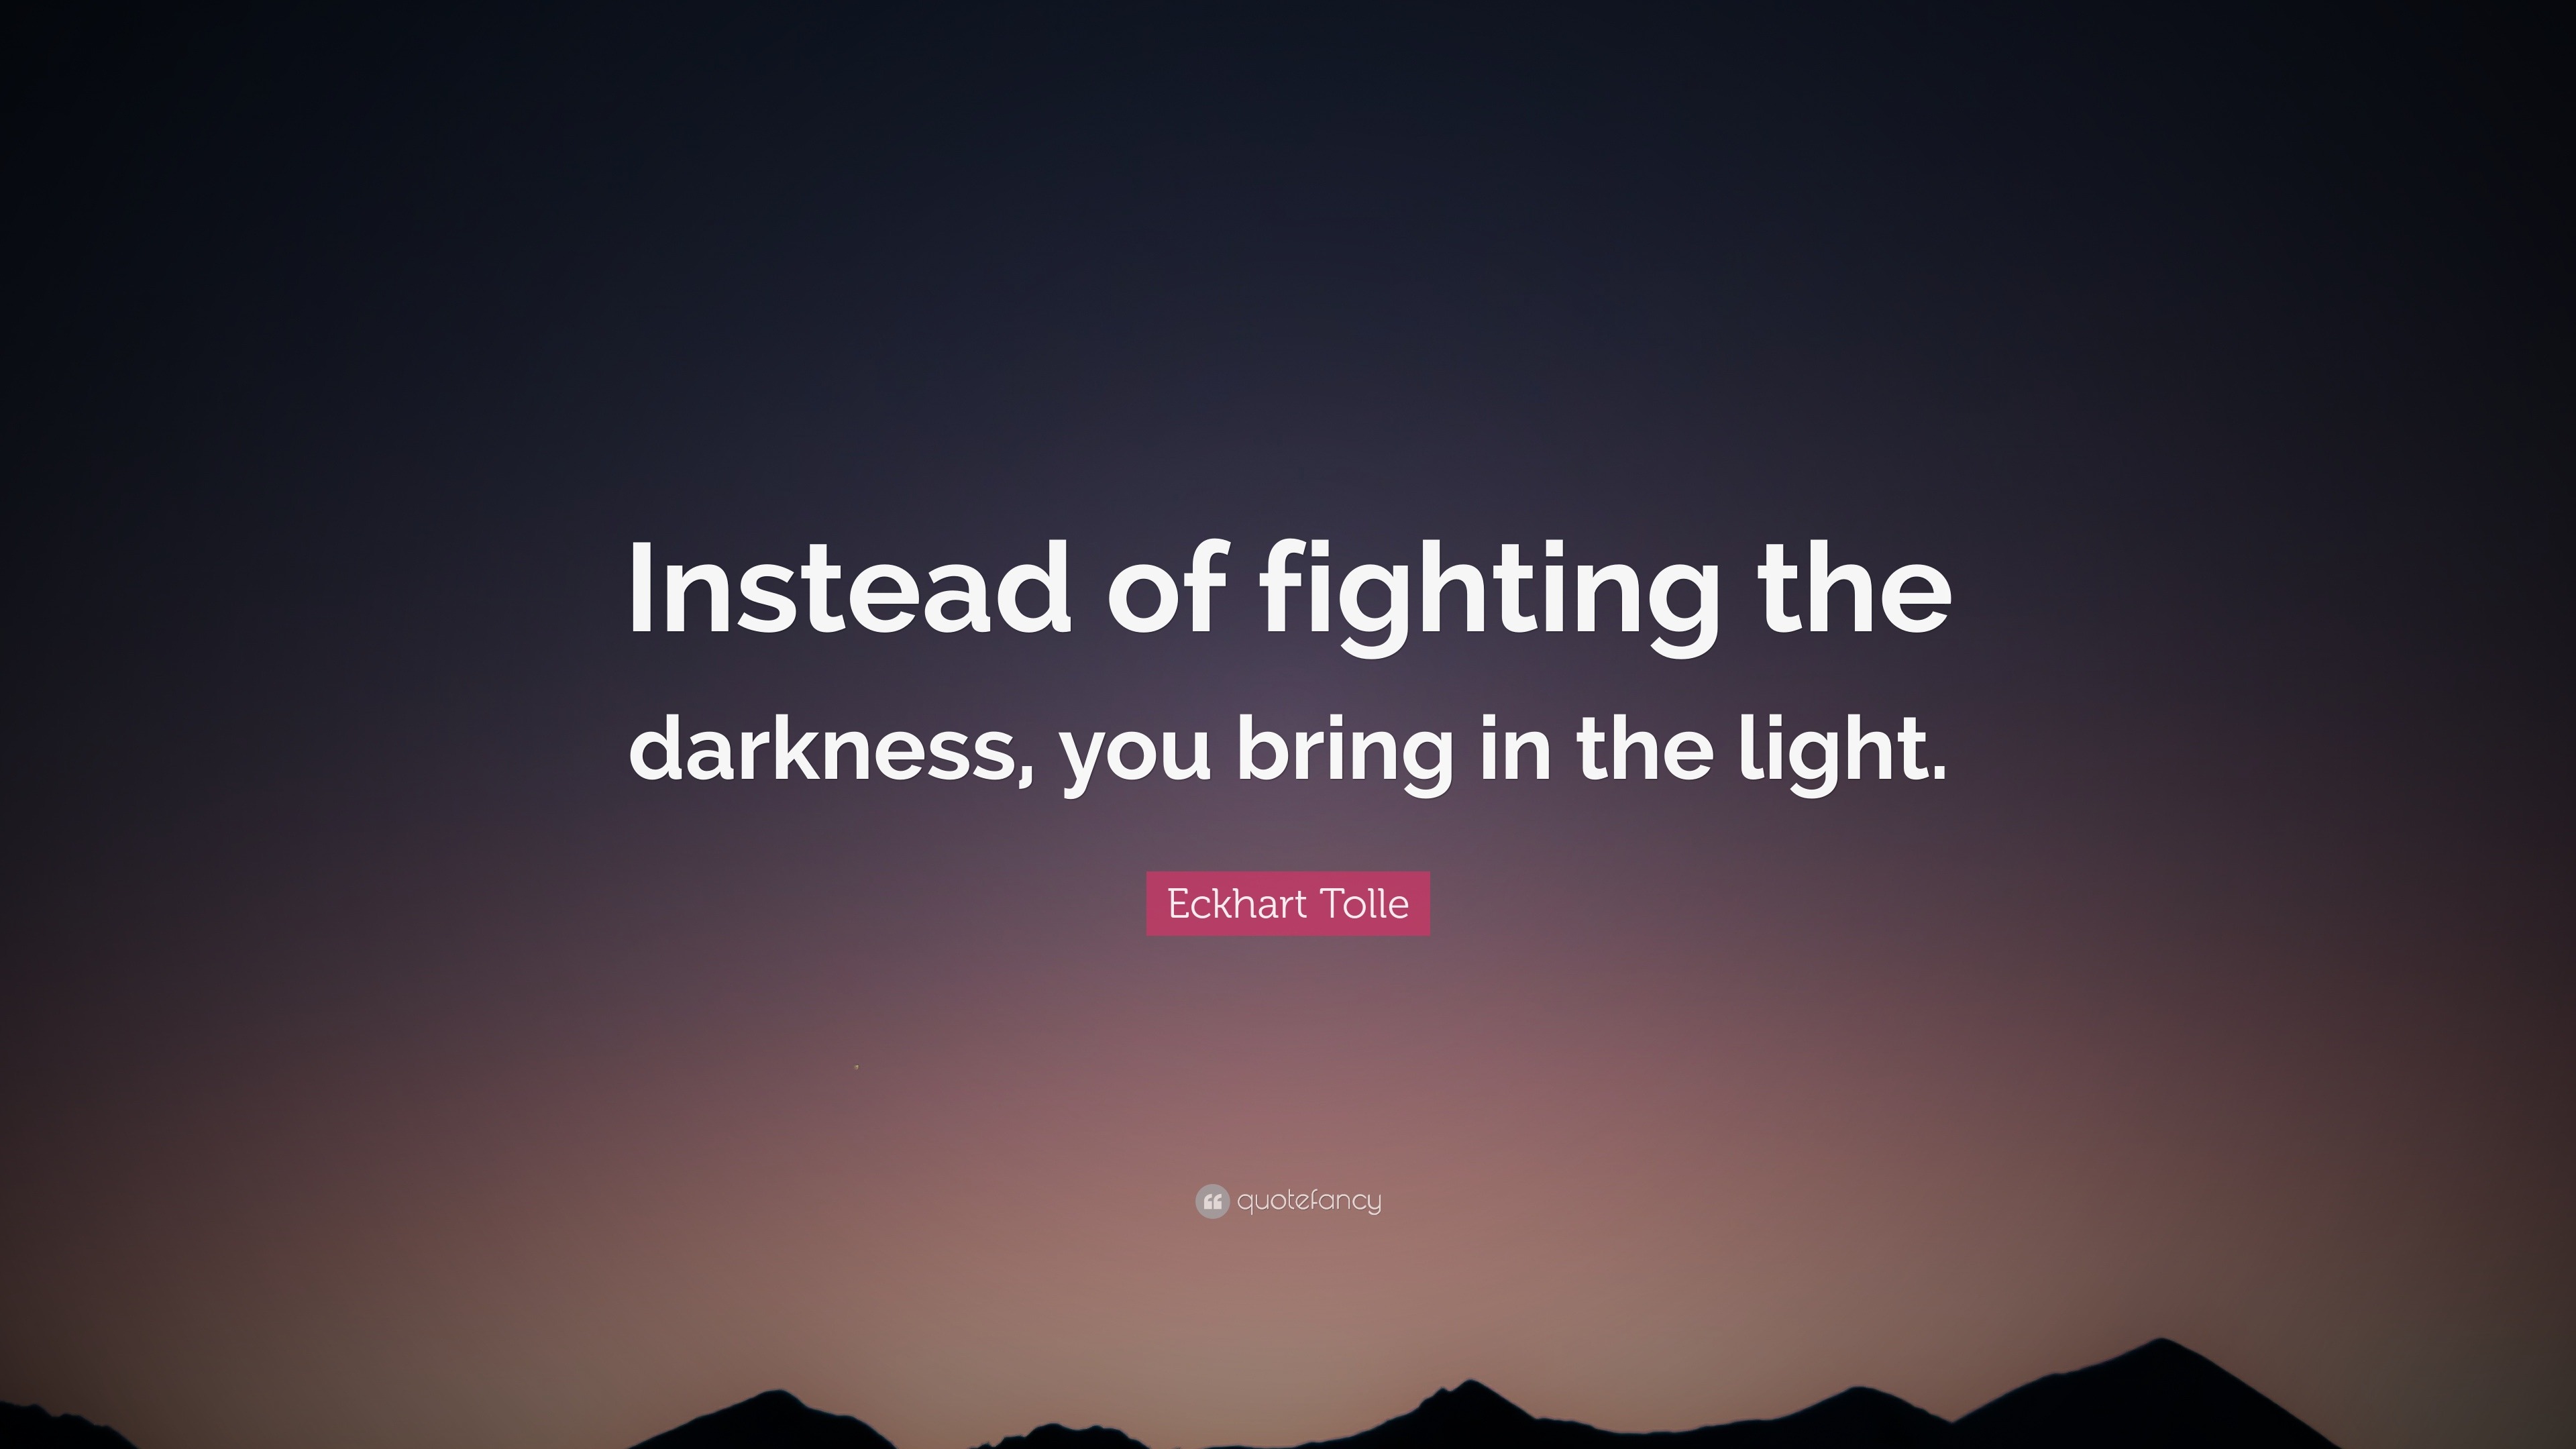 Quote: “Instead of fighting the darkness, you bring light.”